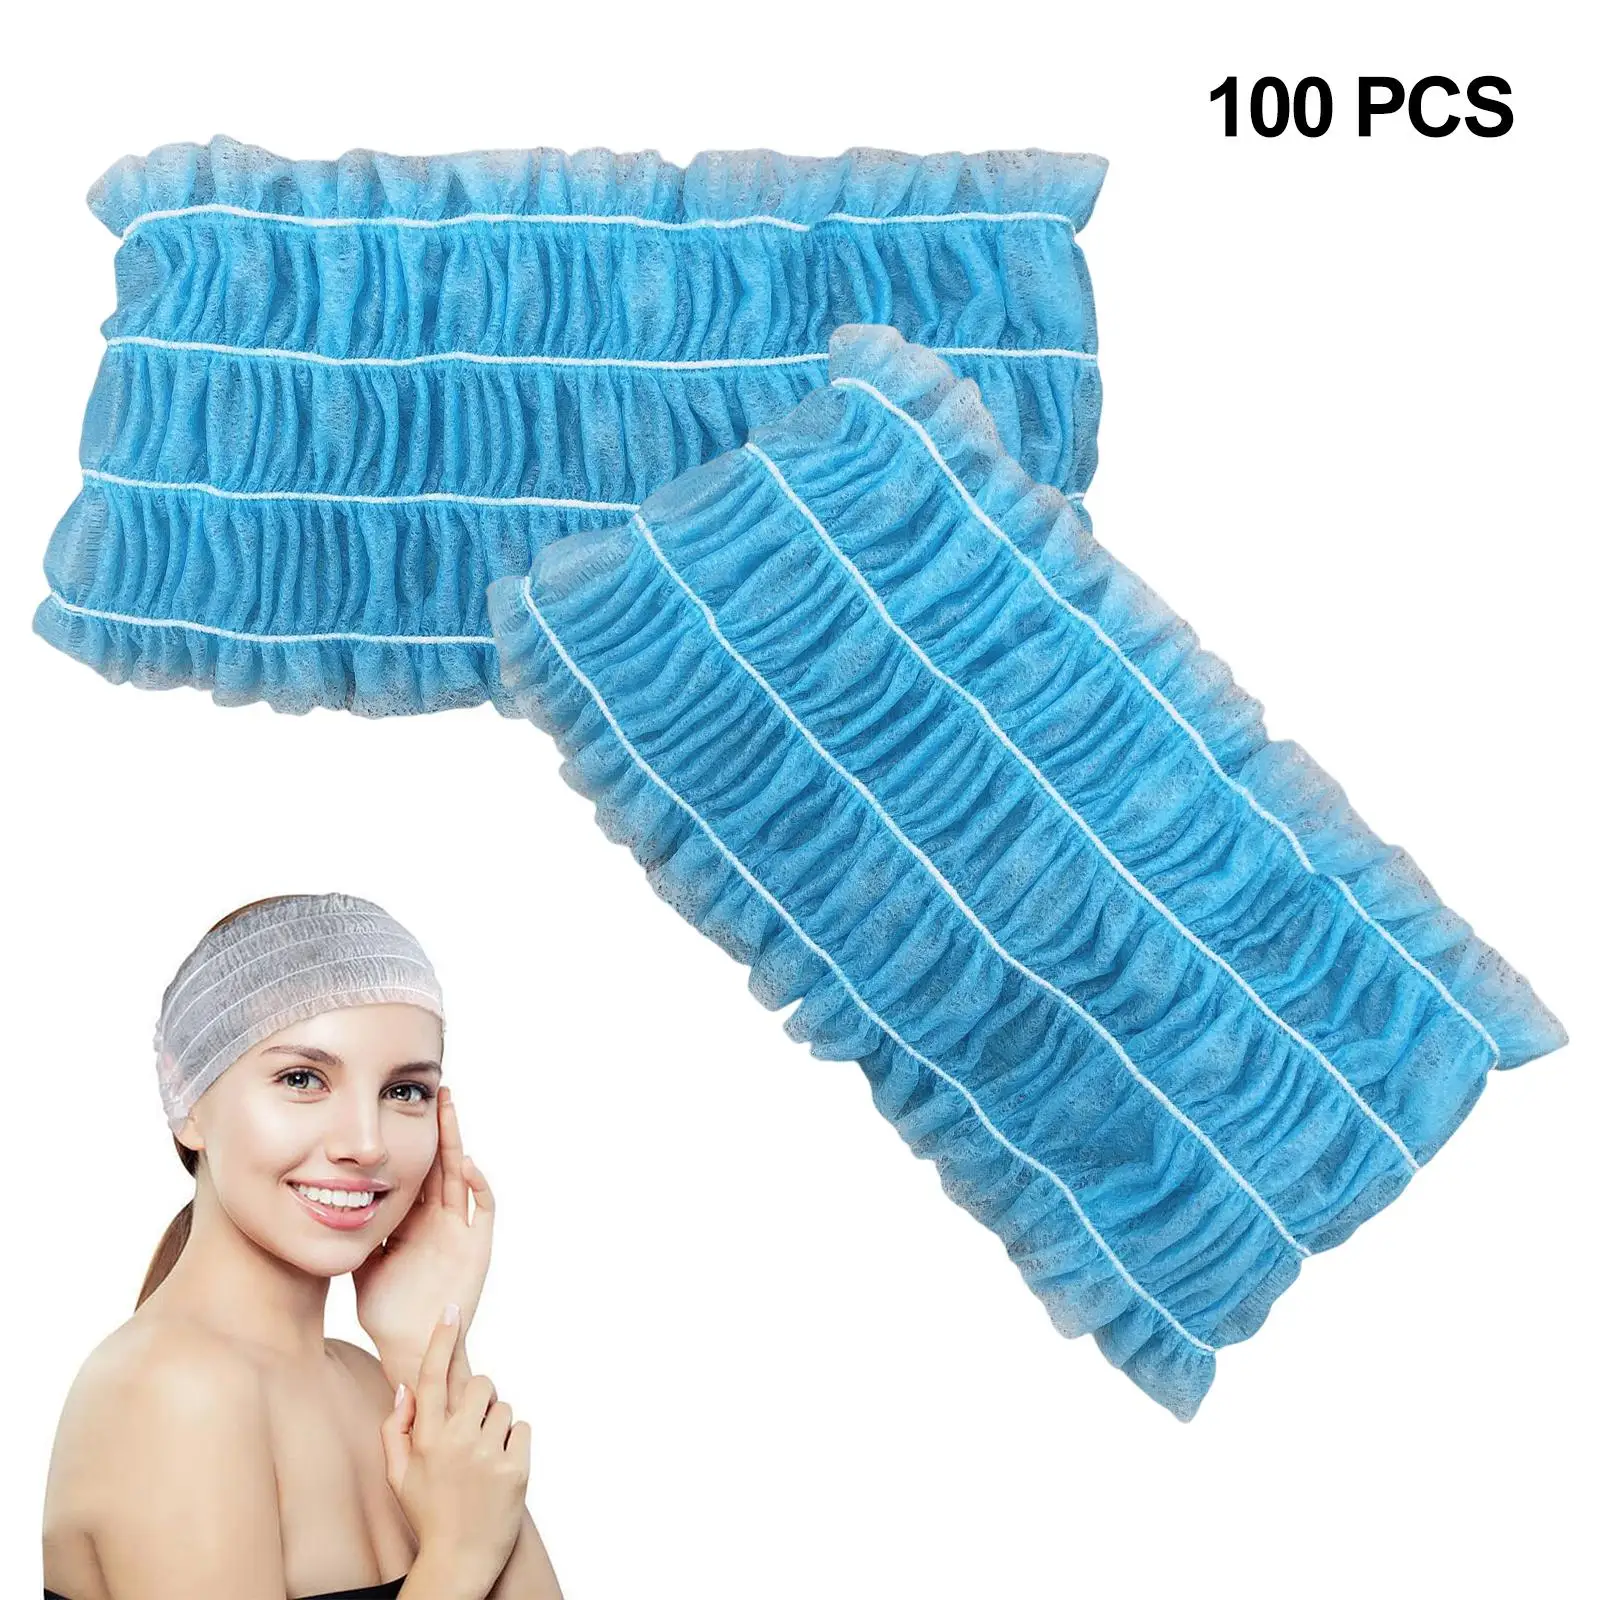 100x Disposable SPA Headbands Women Girls Non Woven Head Wraps for Tanning Skin Care